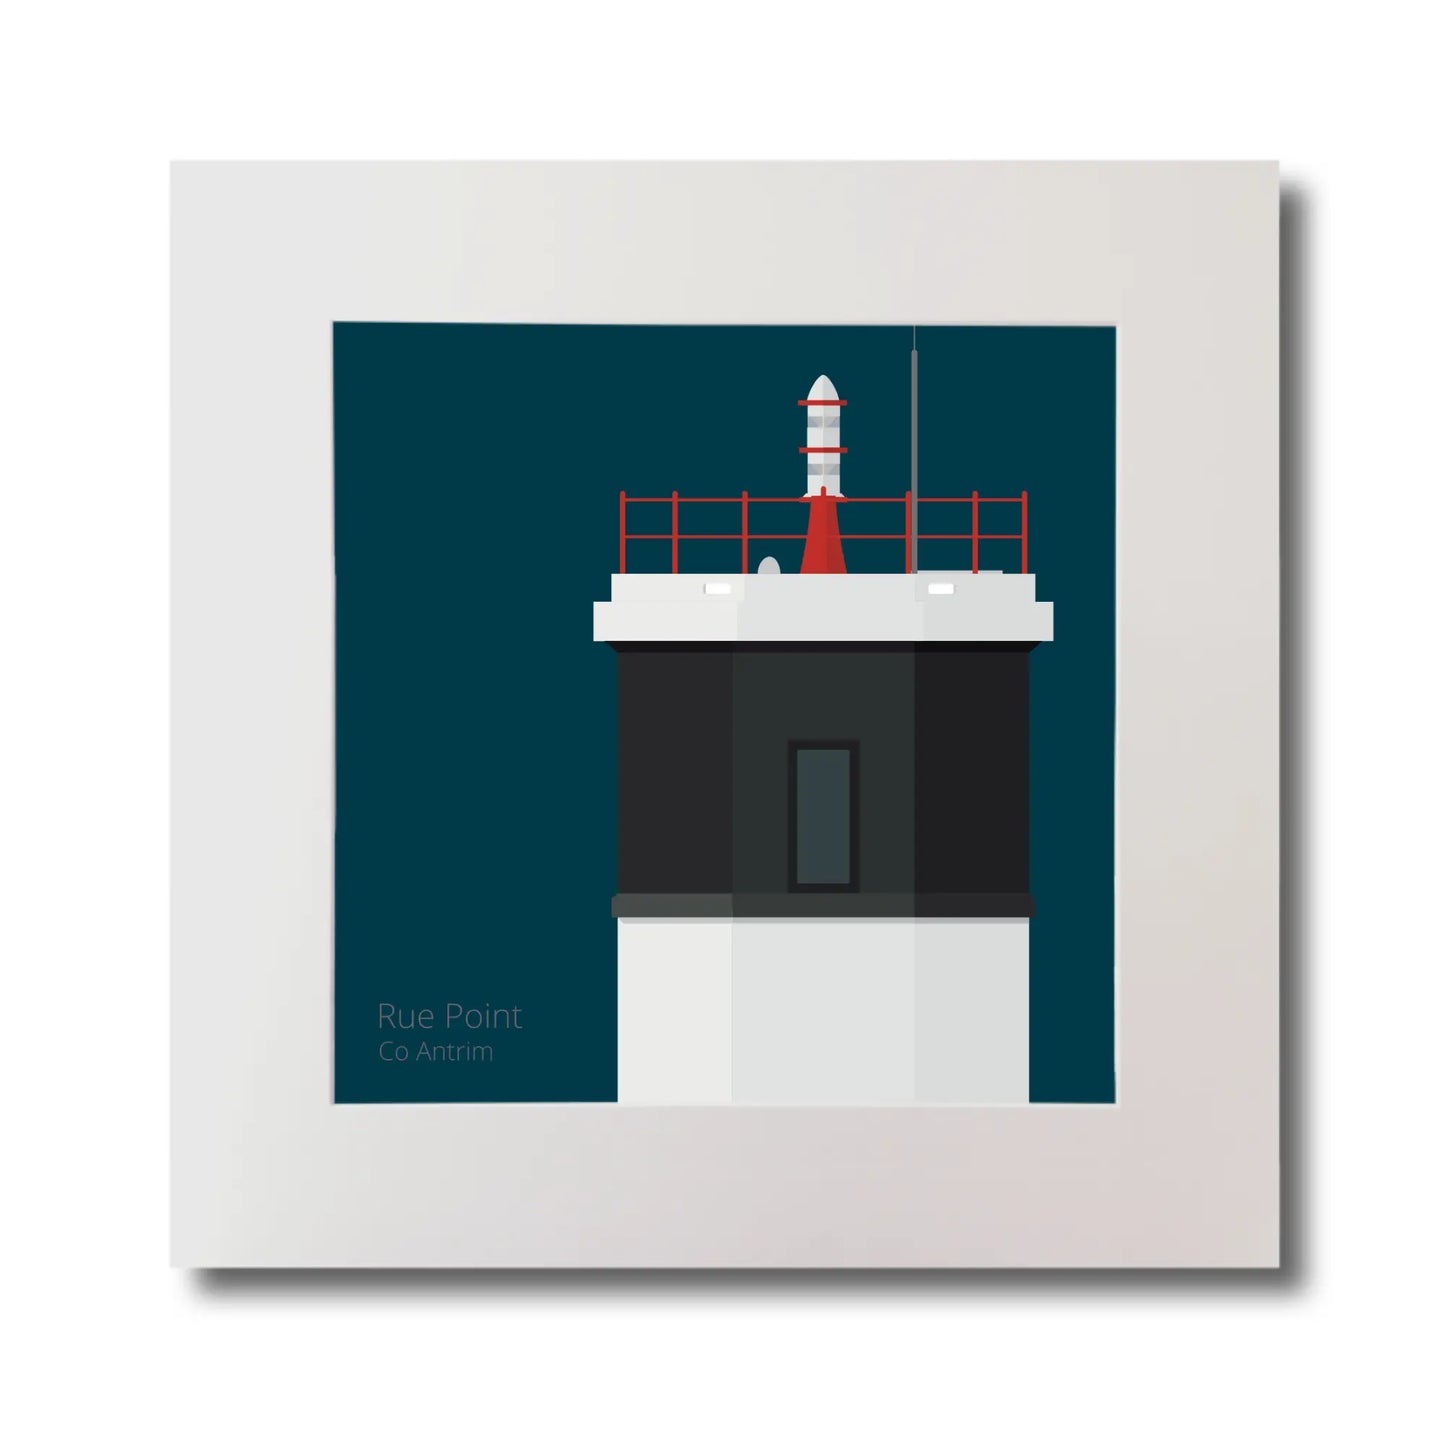 Illustration Rue Point lighthouse on a midnight blue background, mounted and measuring 30x30cm.